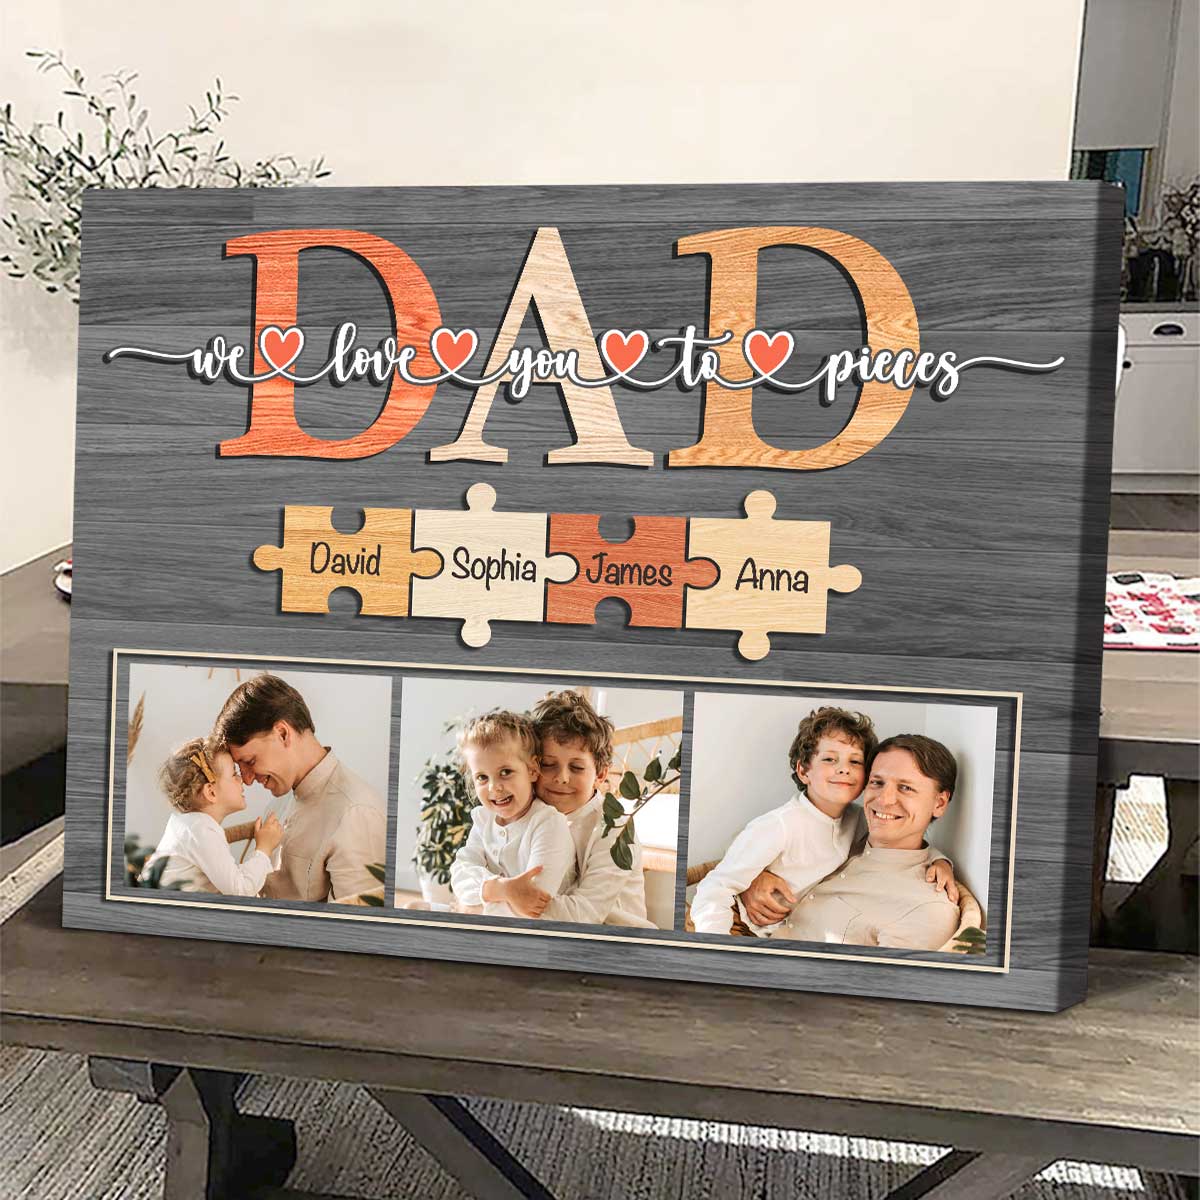 Dad We Love You To Pieces Canvas, Dad Photo Fathers Day Gifts, Dad Personalized Gifts With Names